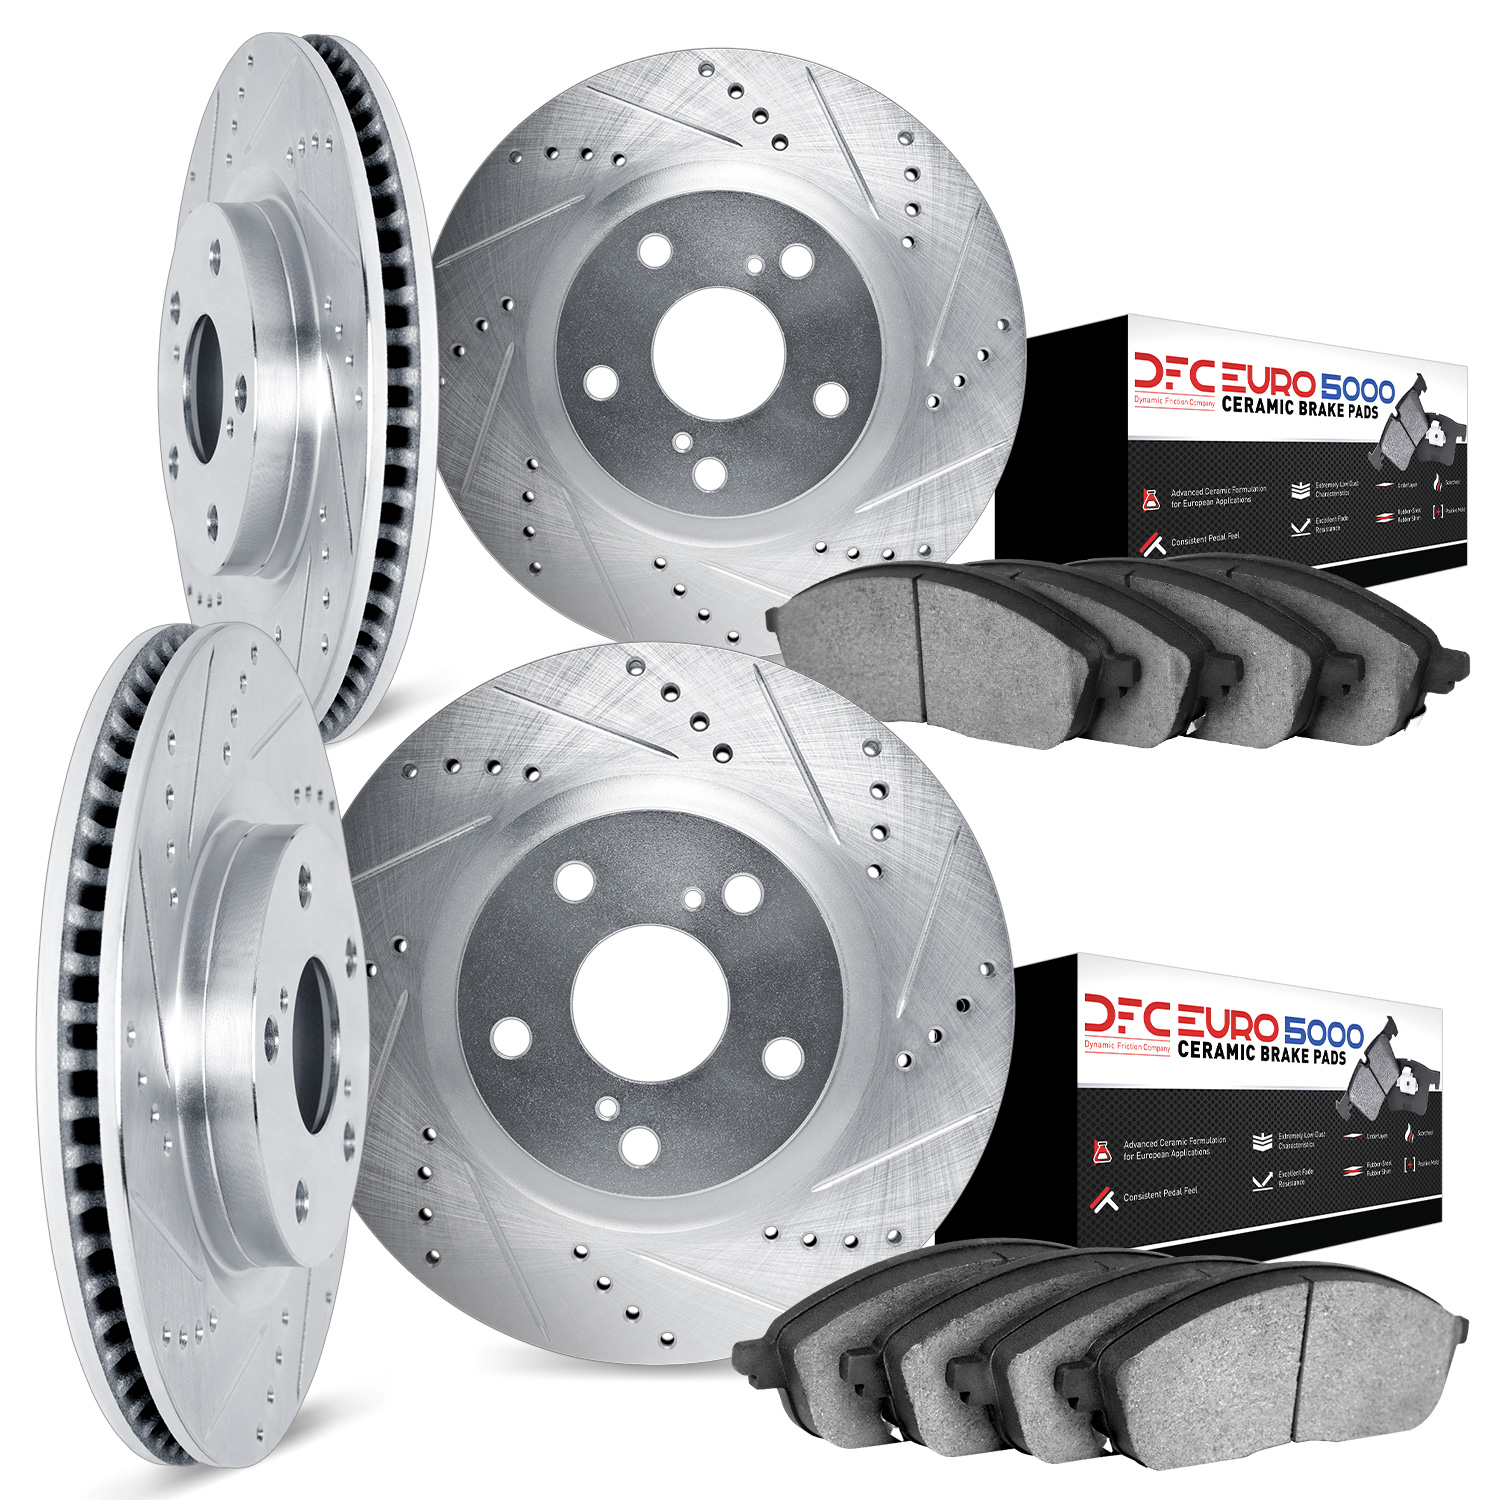 7604-46001 Drilled/Slotted Brake Rotors w/5000 Euro Ceramic Brake Pads Kit [Silver], 2009-2015 GM, Position: Front and Rear